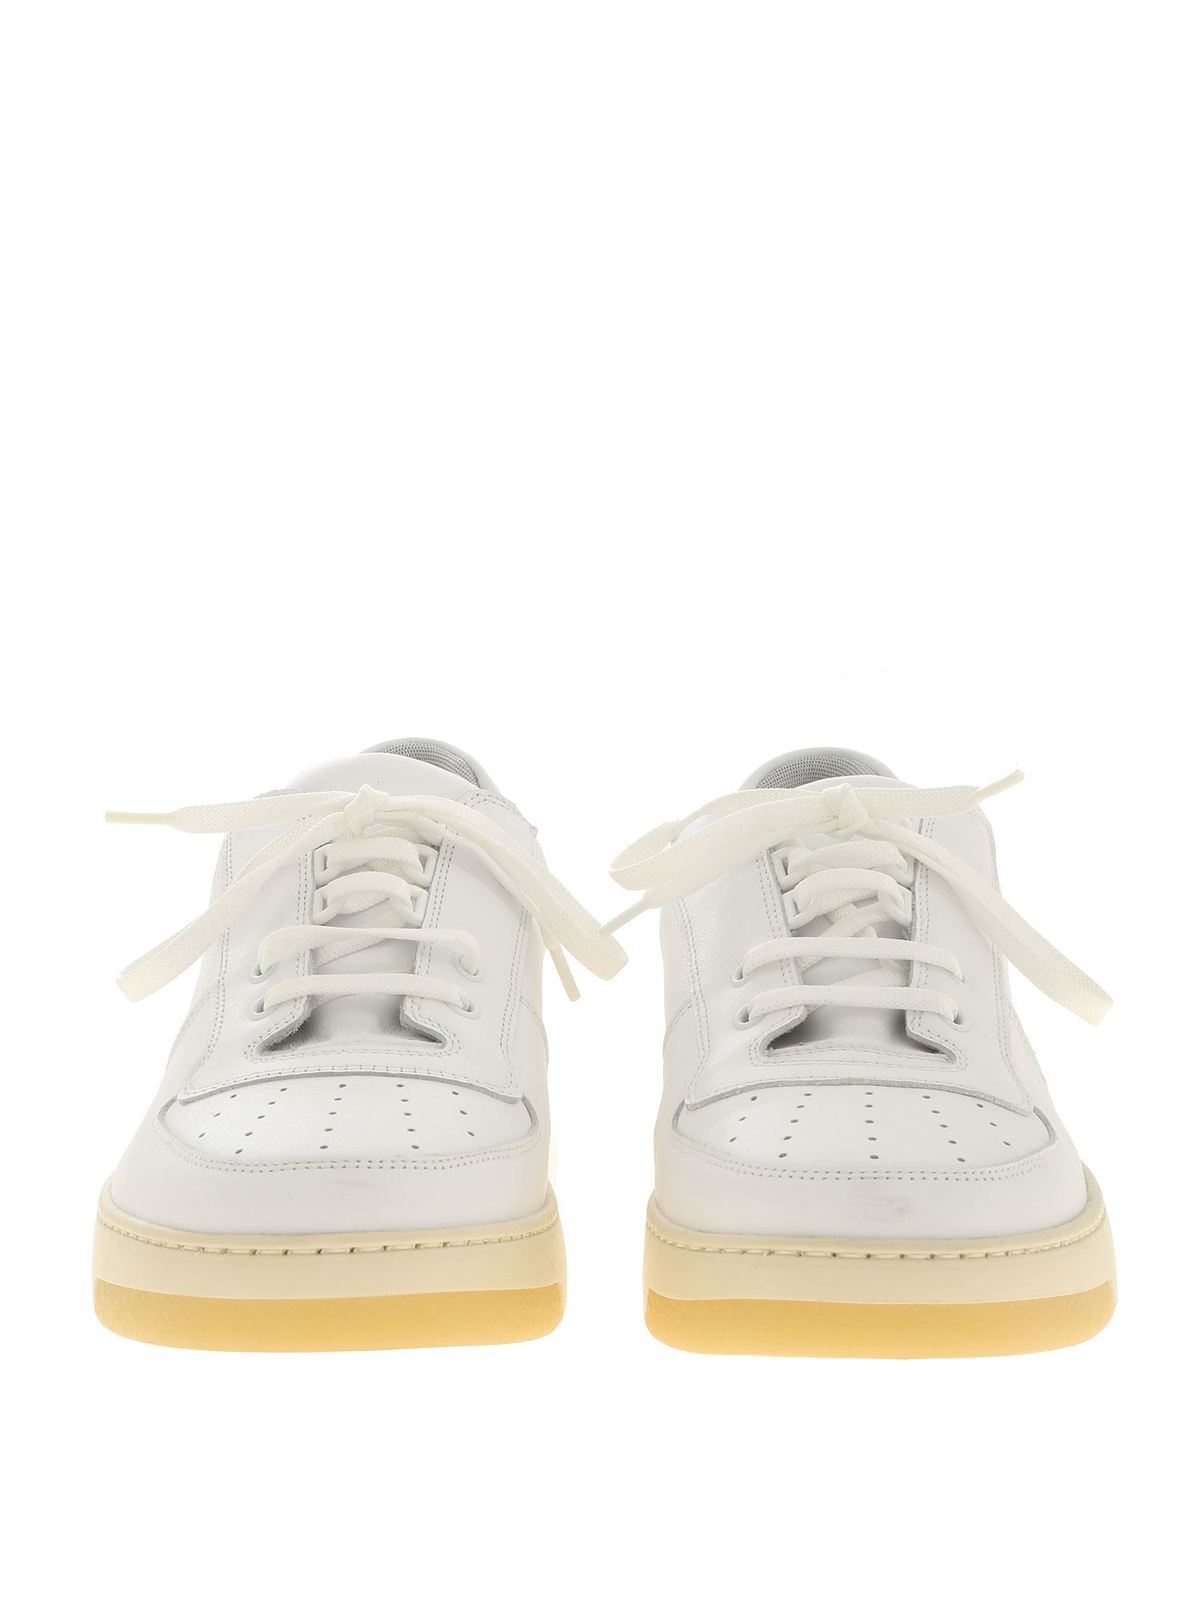 Acne Studios Perey Lace Up White スニーカー